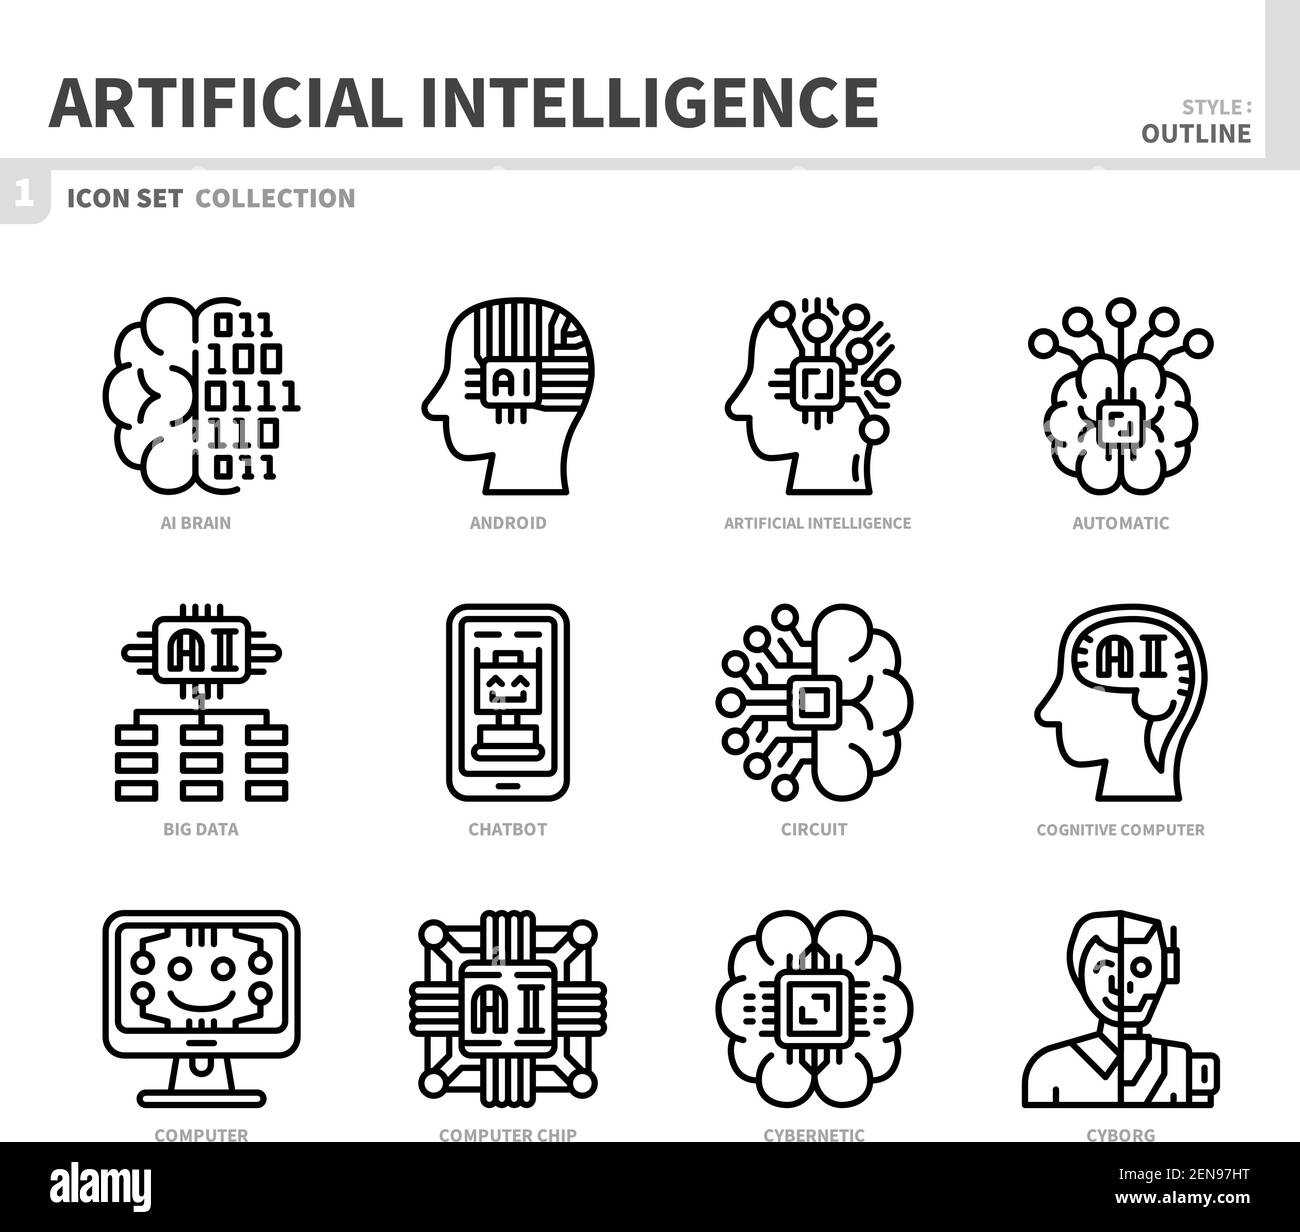 artificial intelligence icon set,outline style,vector and illustration Stock Vector